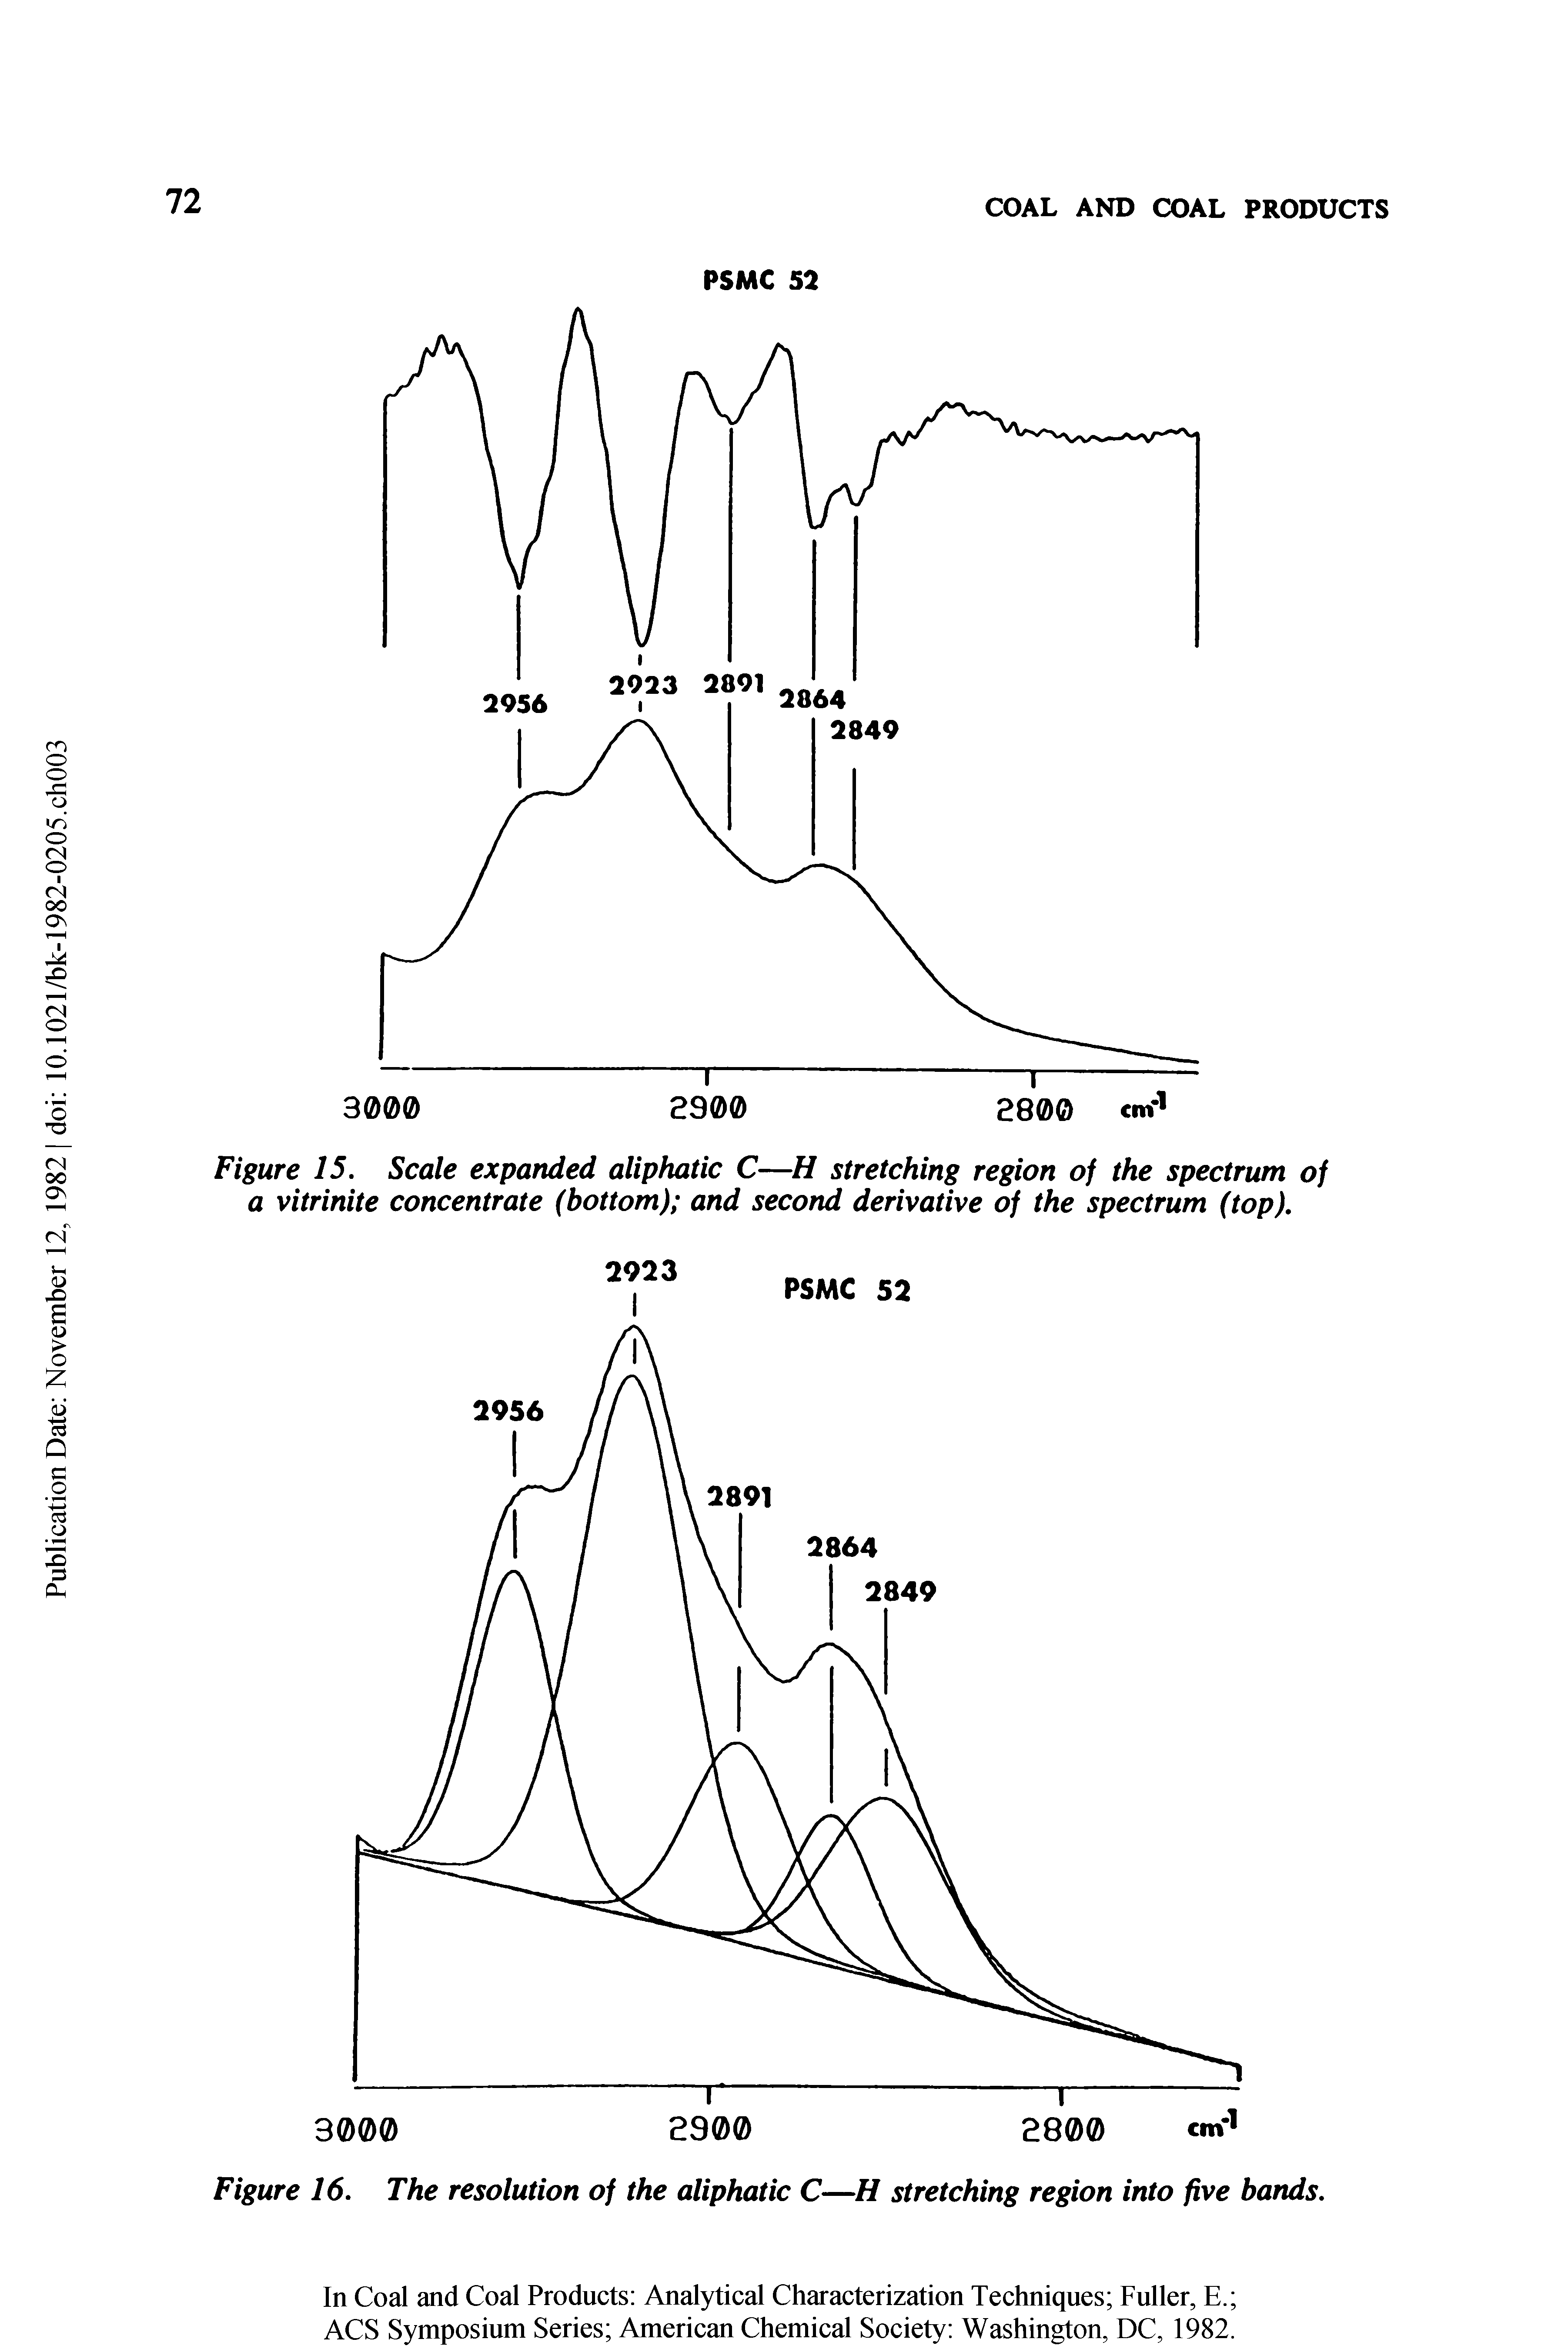 Figure 15. Scale expanded aliphatic C—H stretching region of the spectrum of a vitrinite concentrate (bottom) and second derivative of the spectrum (top).